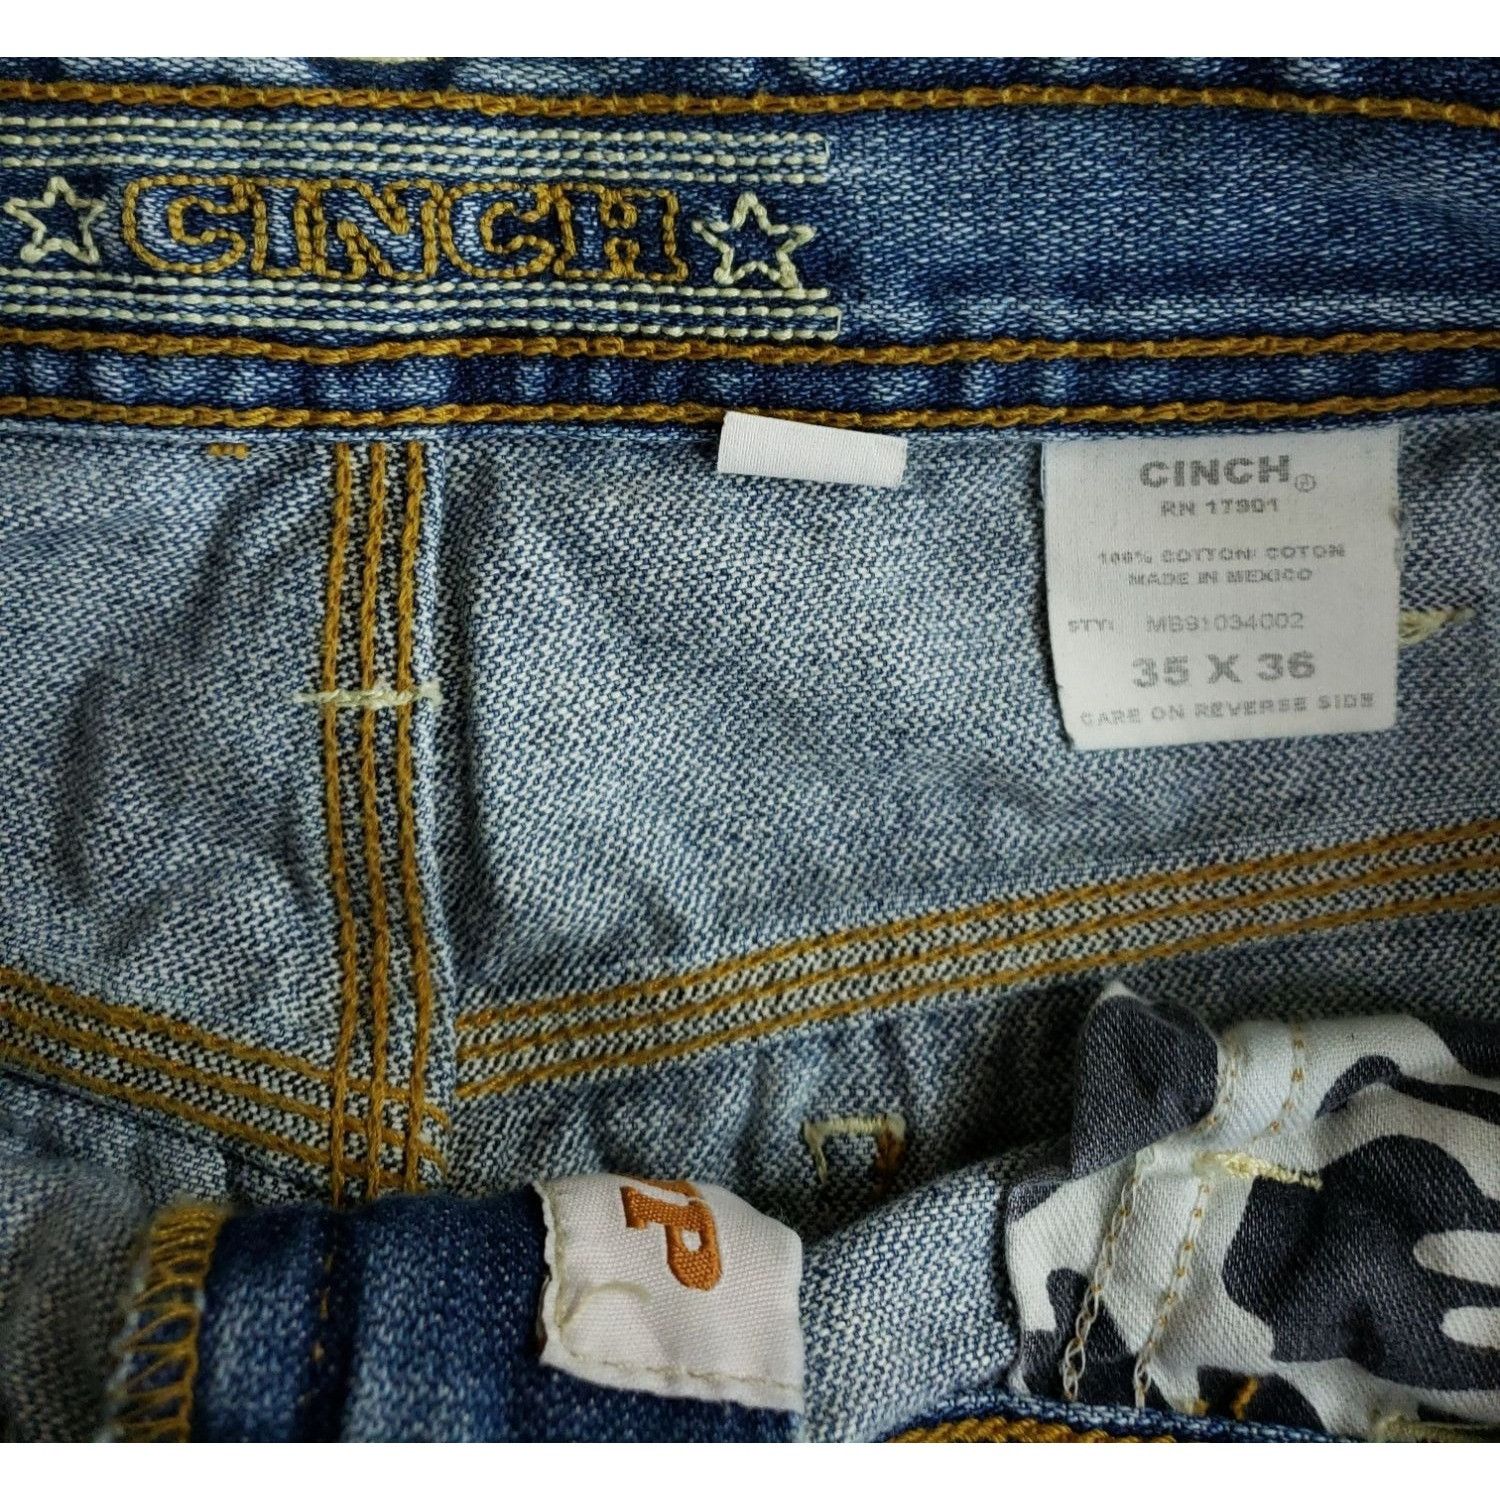 Cinch Cinch Relaxed Fit Jeans Men's Size 34/36 Distressed Light Size US 34 / EU 50 - 8 Thumbnail